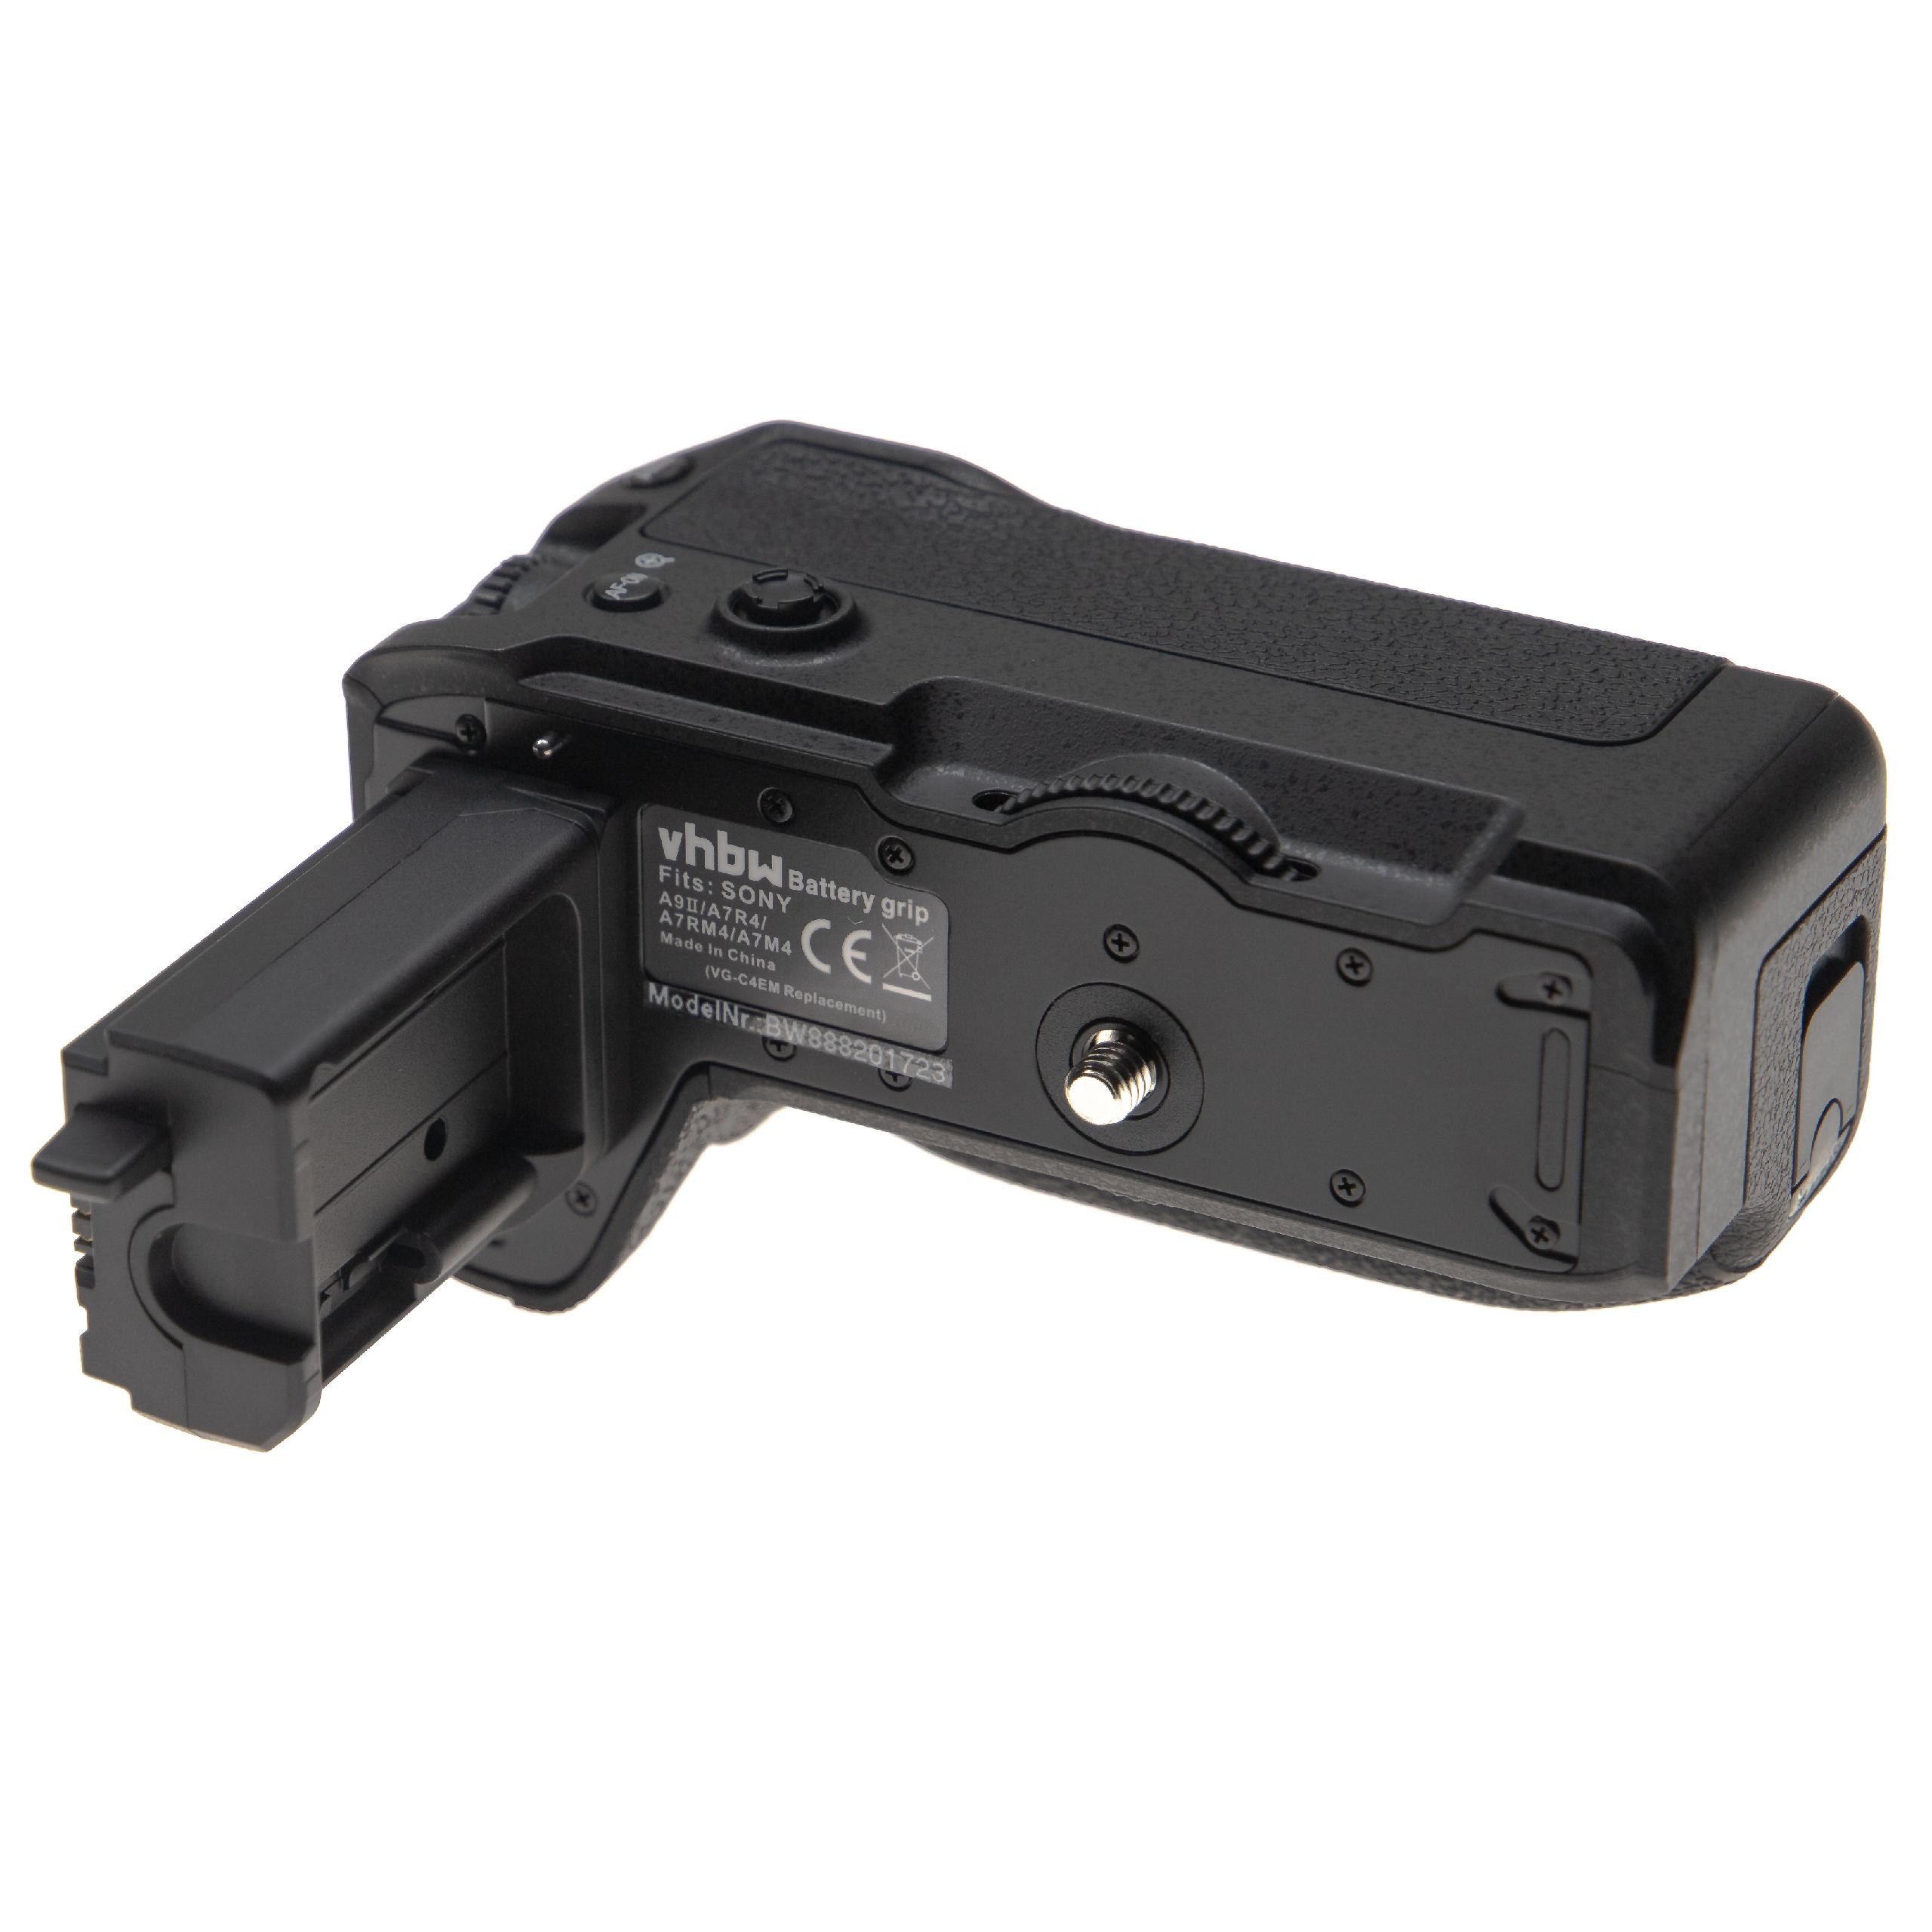 Battery Grip replaces Sony VG-C4EM for Sony Camera Incl. Trigger